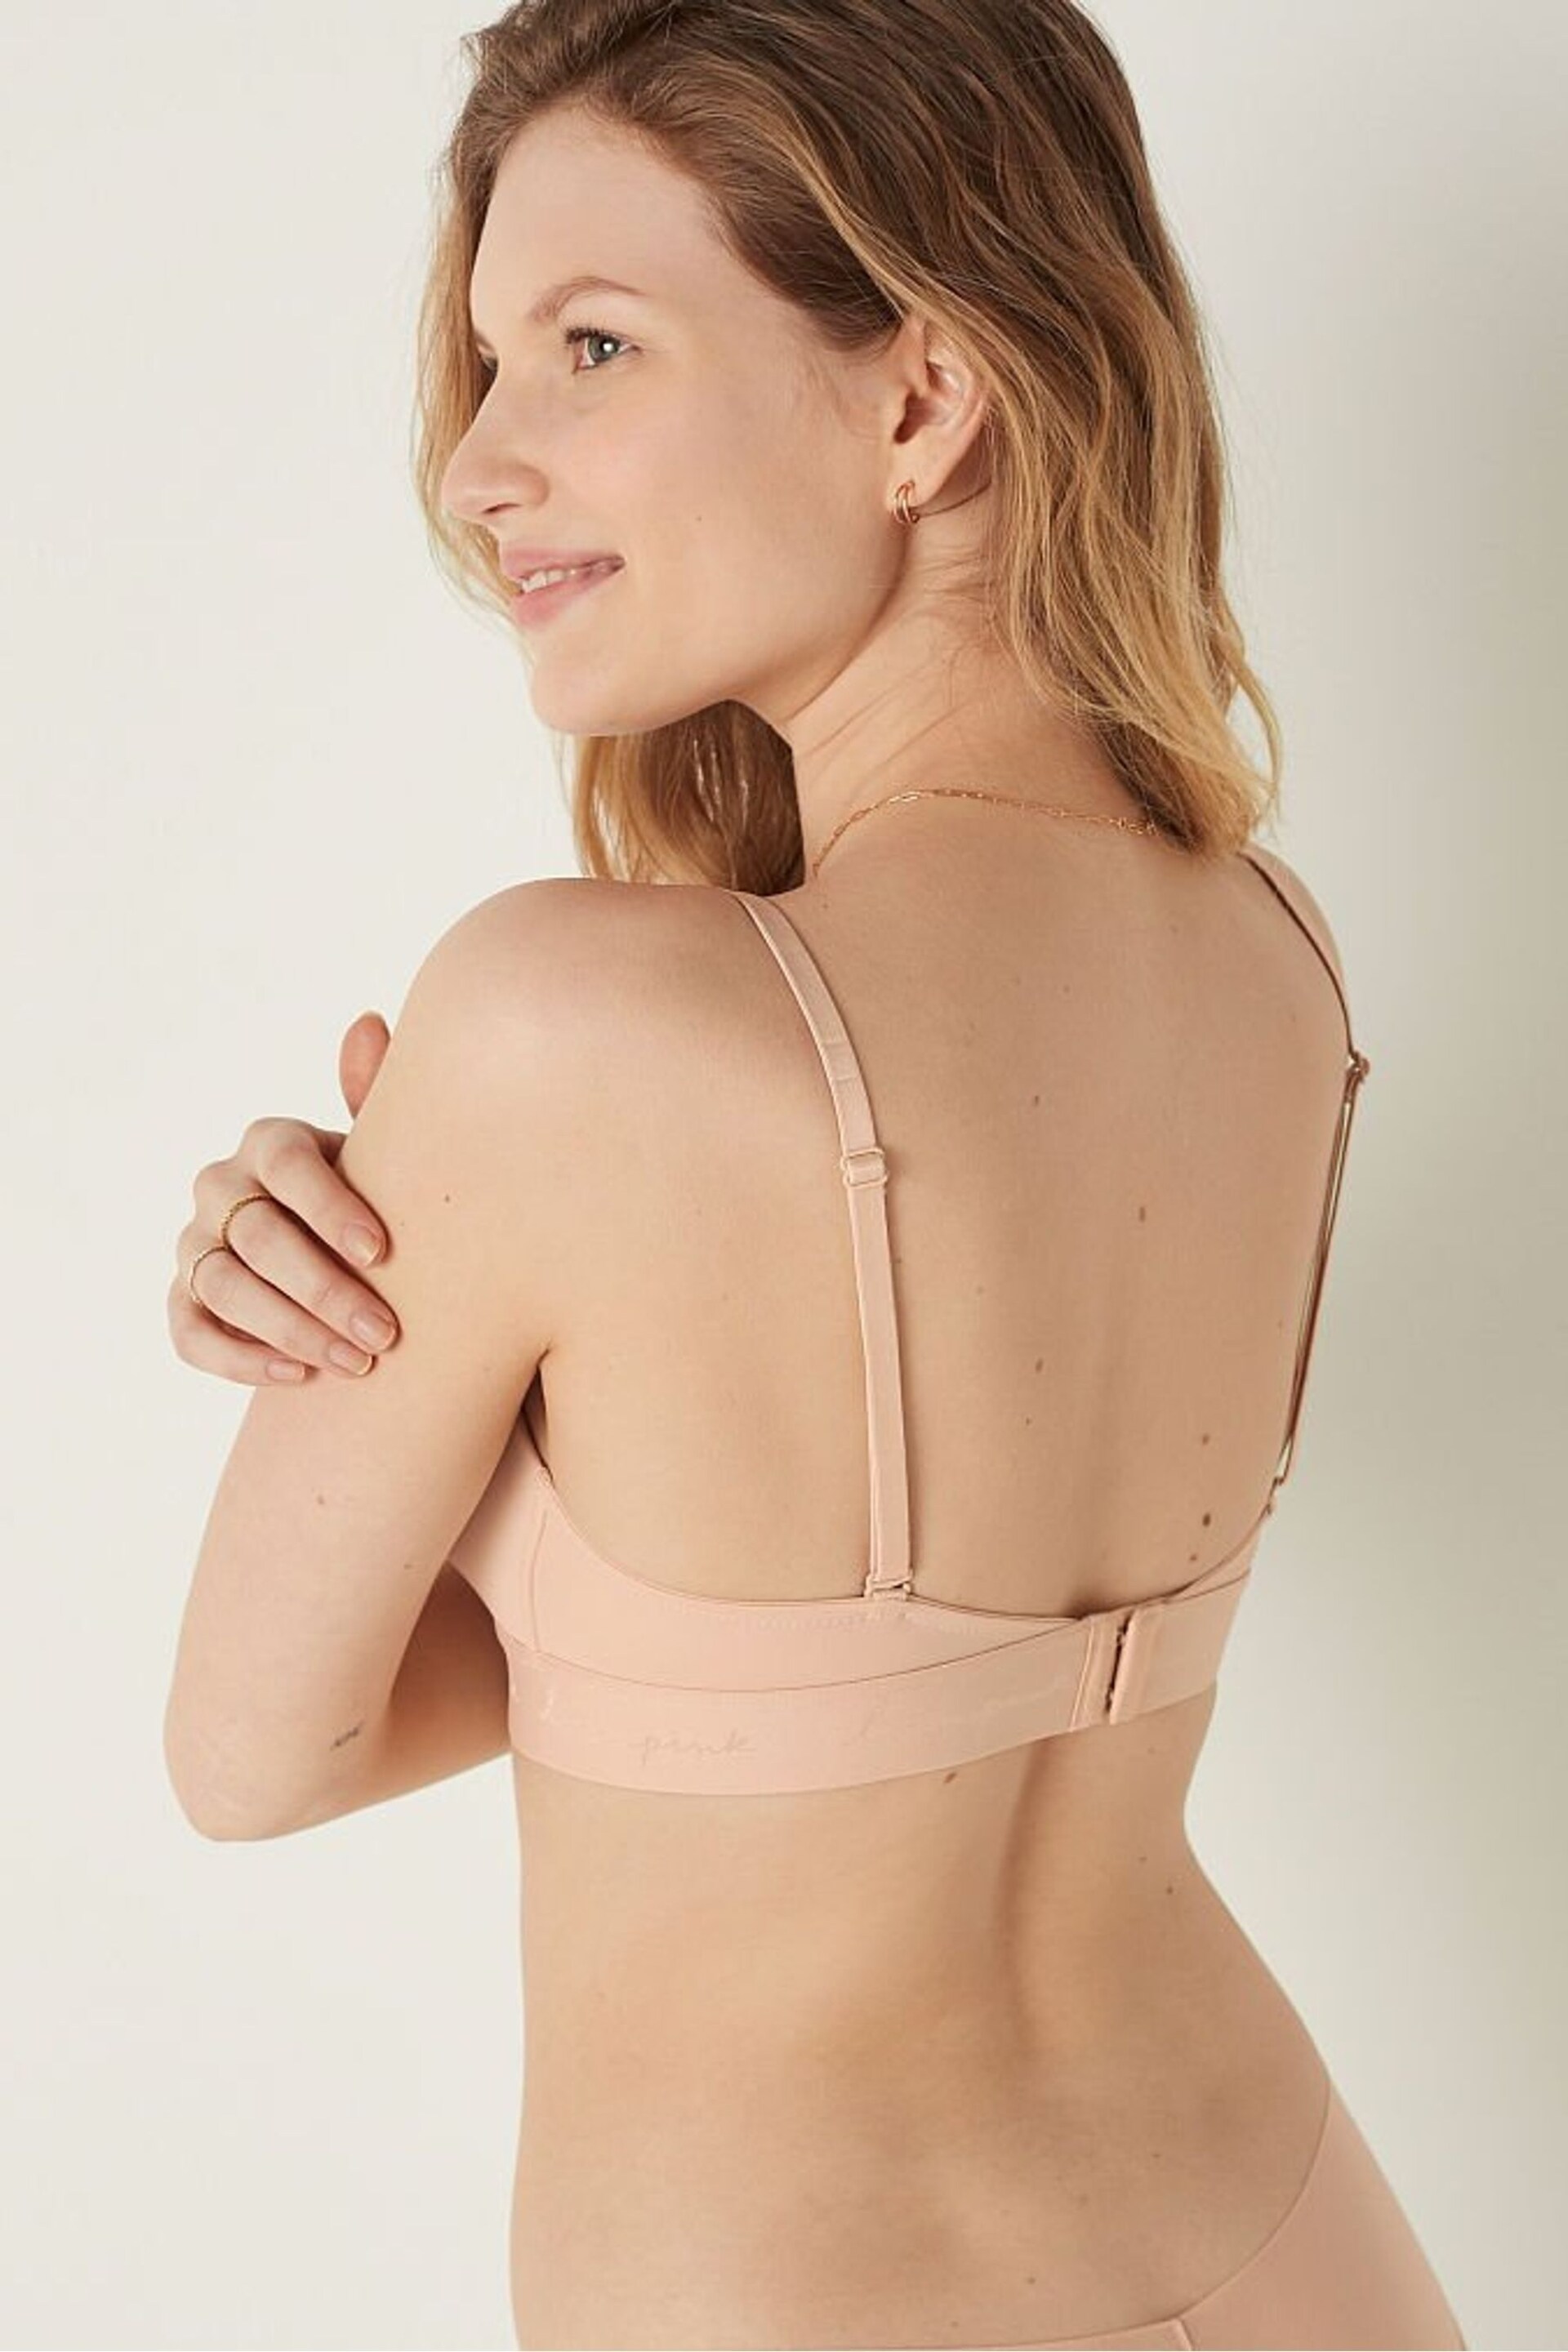 Victoria's Secret PINK Champagne Nude Non Wired Lightly Lined Smooth T-Shirt Bra - Image 2 of 5